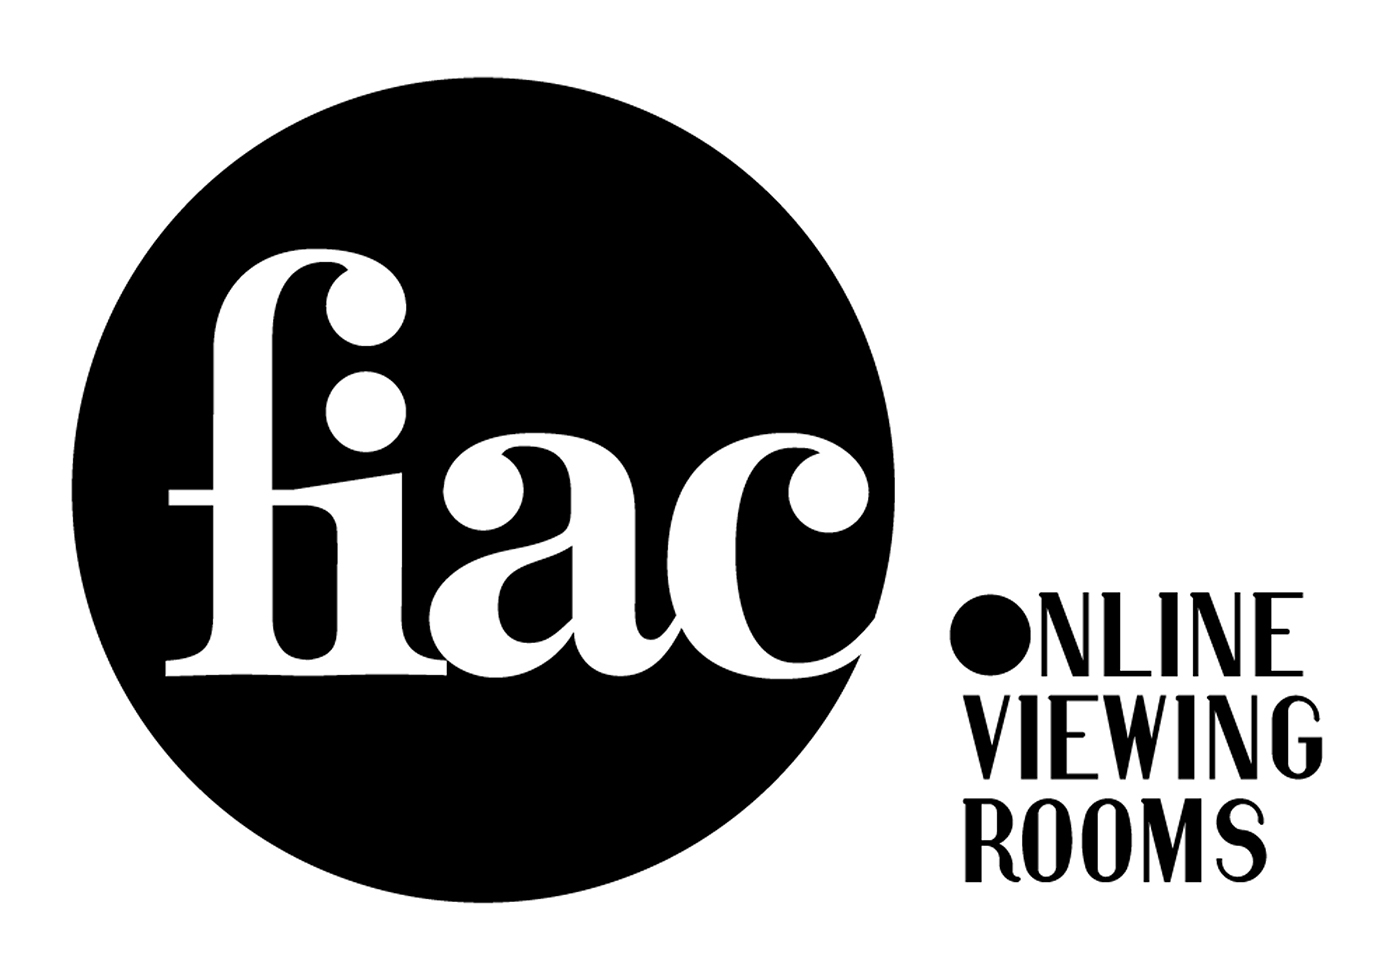 FIAC Online Viewing Rooms